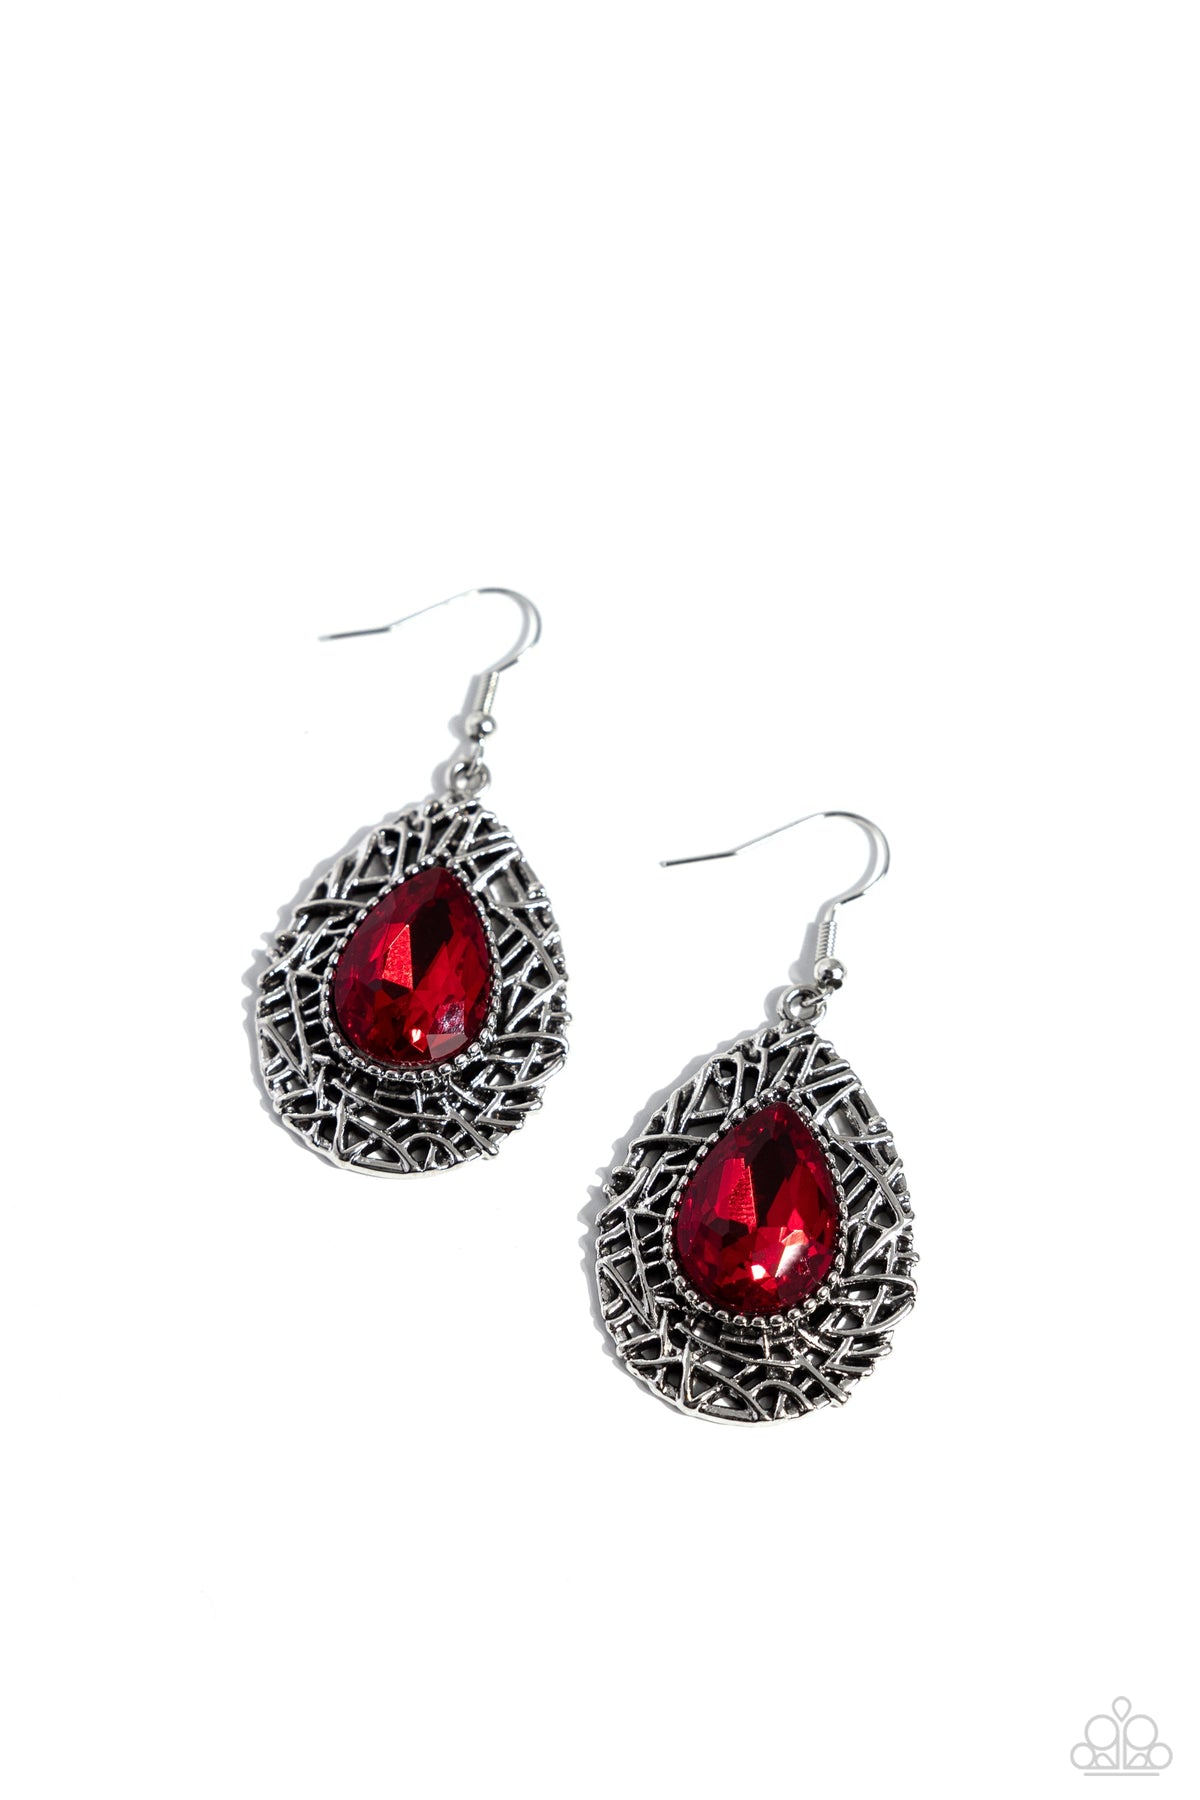 Nest Nouveau Red Rhinestone Earrings - Paparazzi Accessories- lightbox - CarasShop.com - $5 Jewelry by Cara Jewels